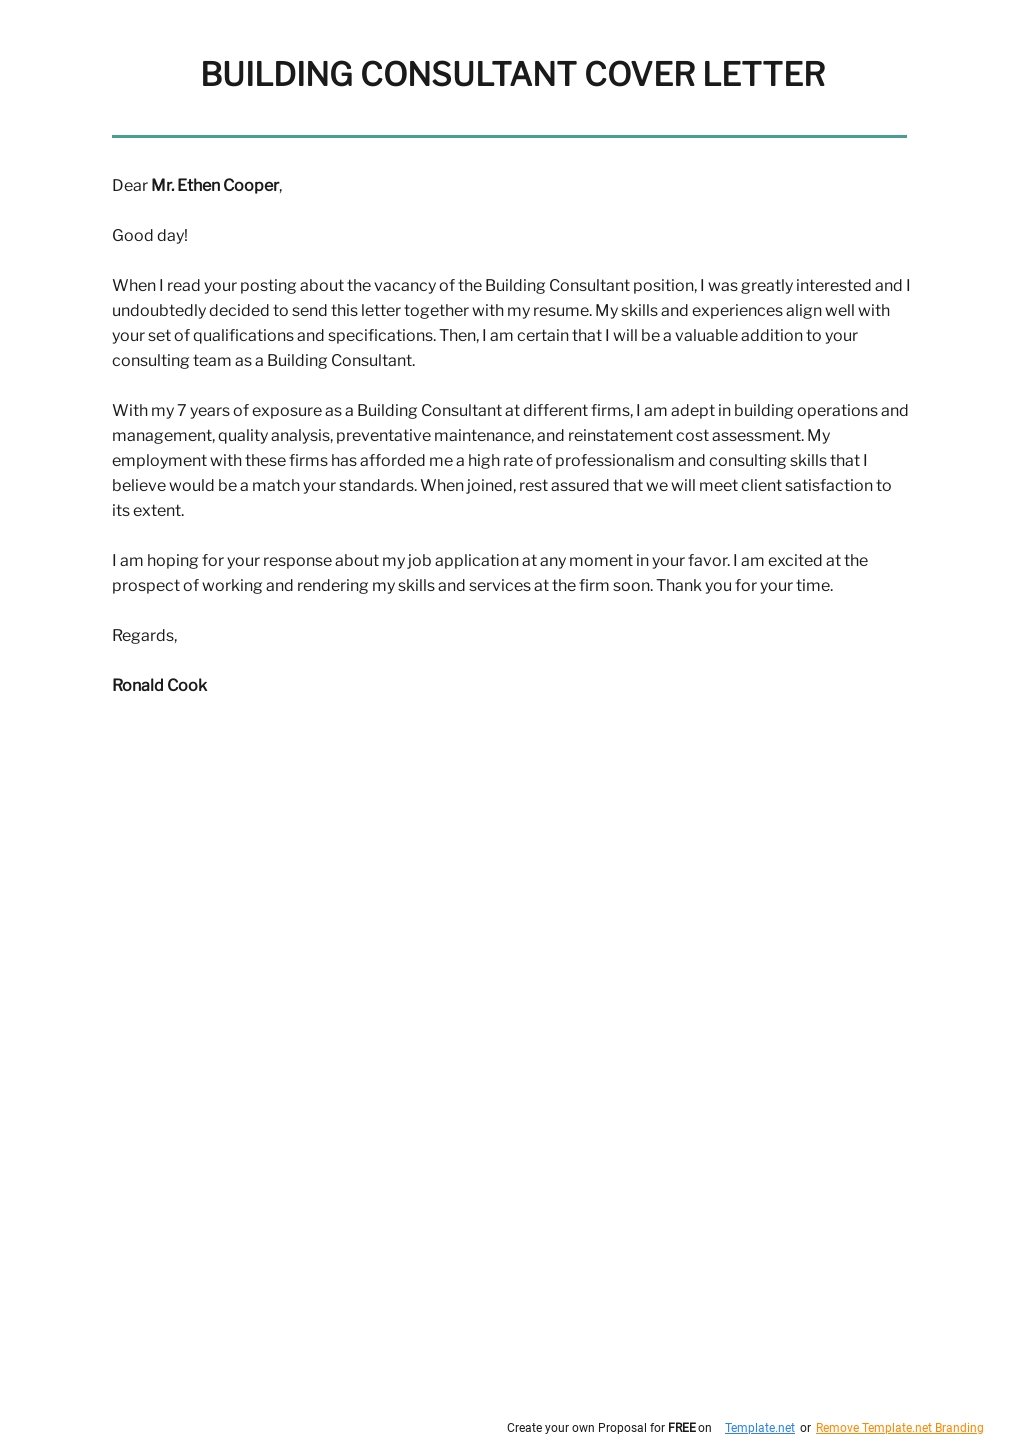 Free Building Consultant Cover Letter Template.jpe